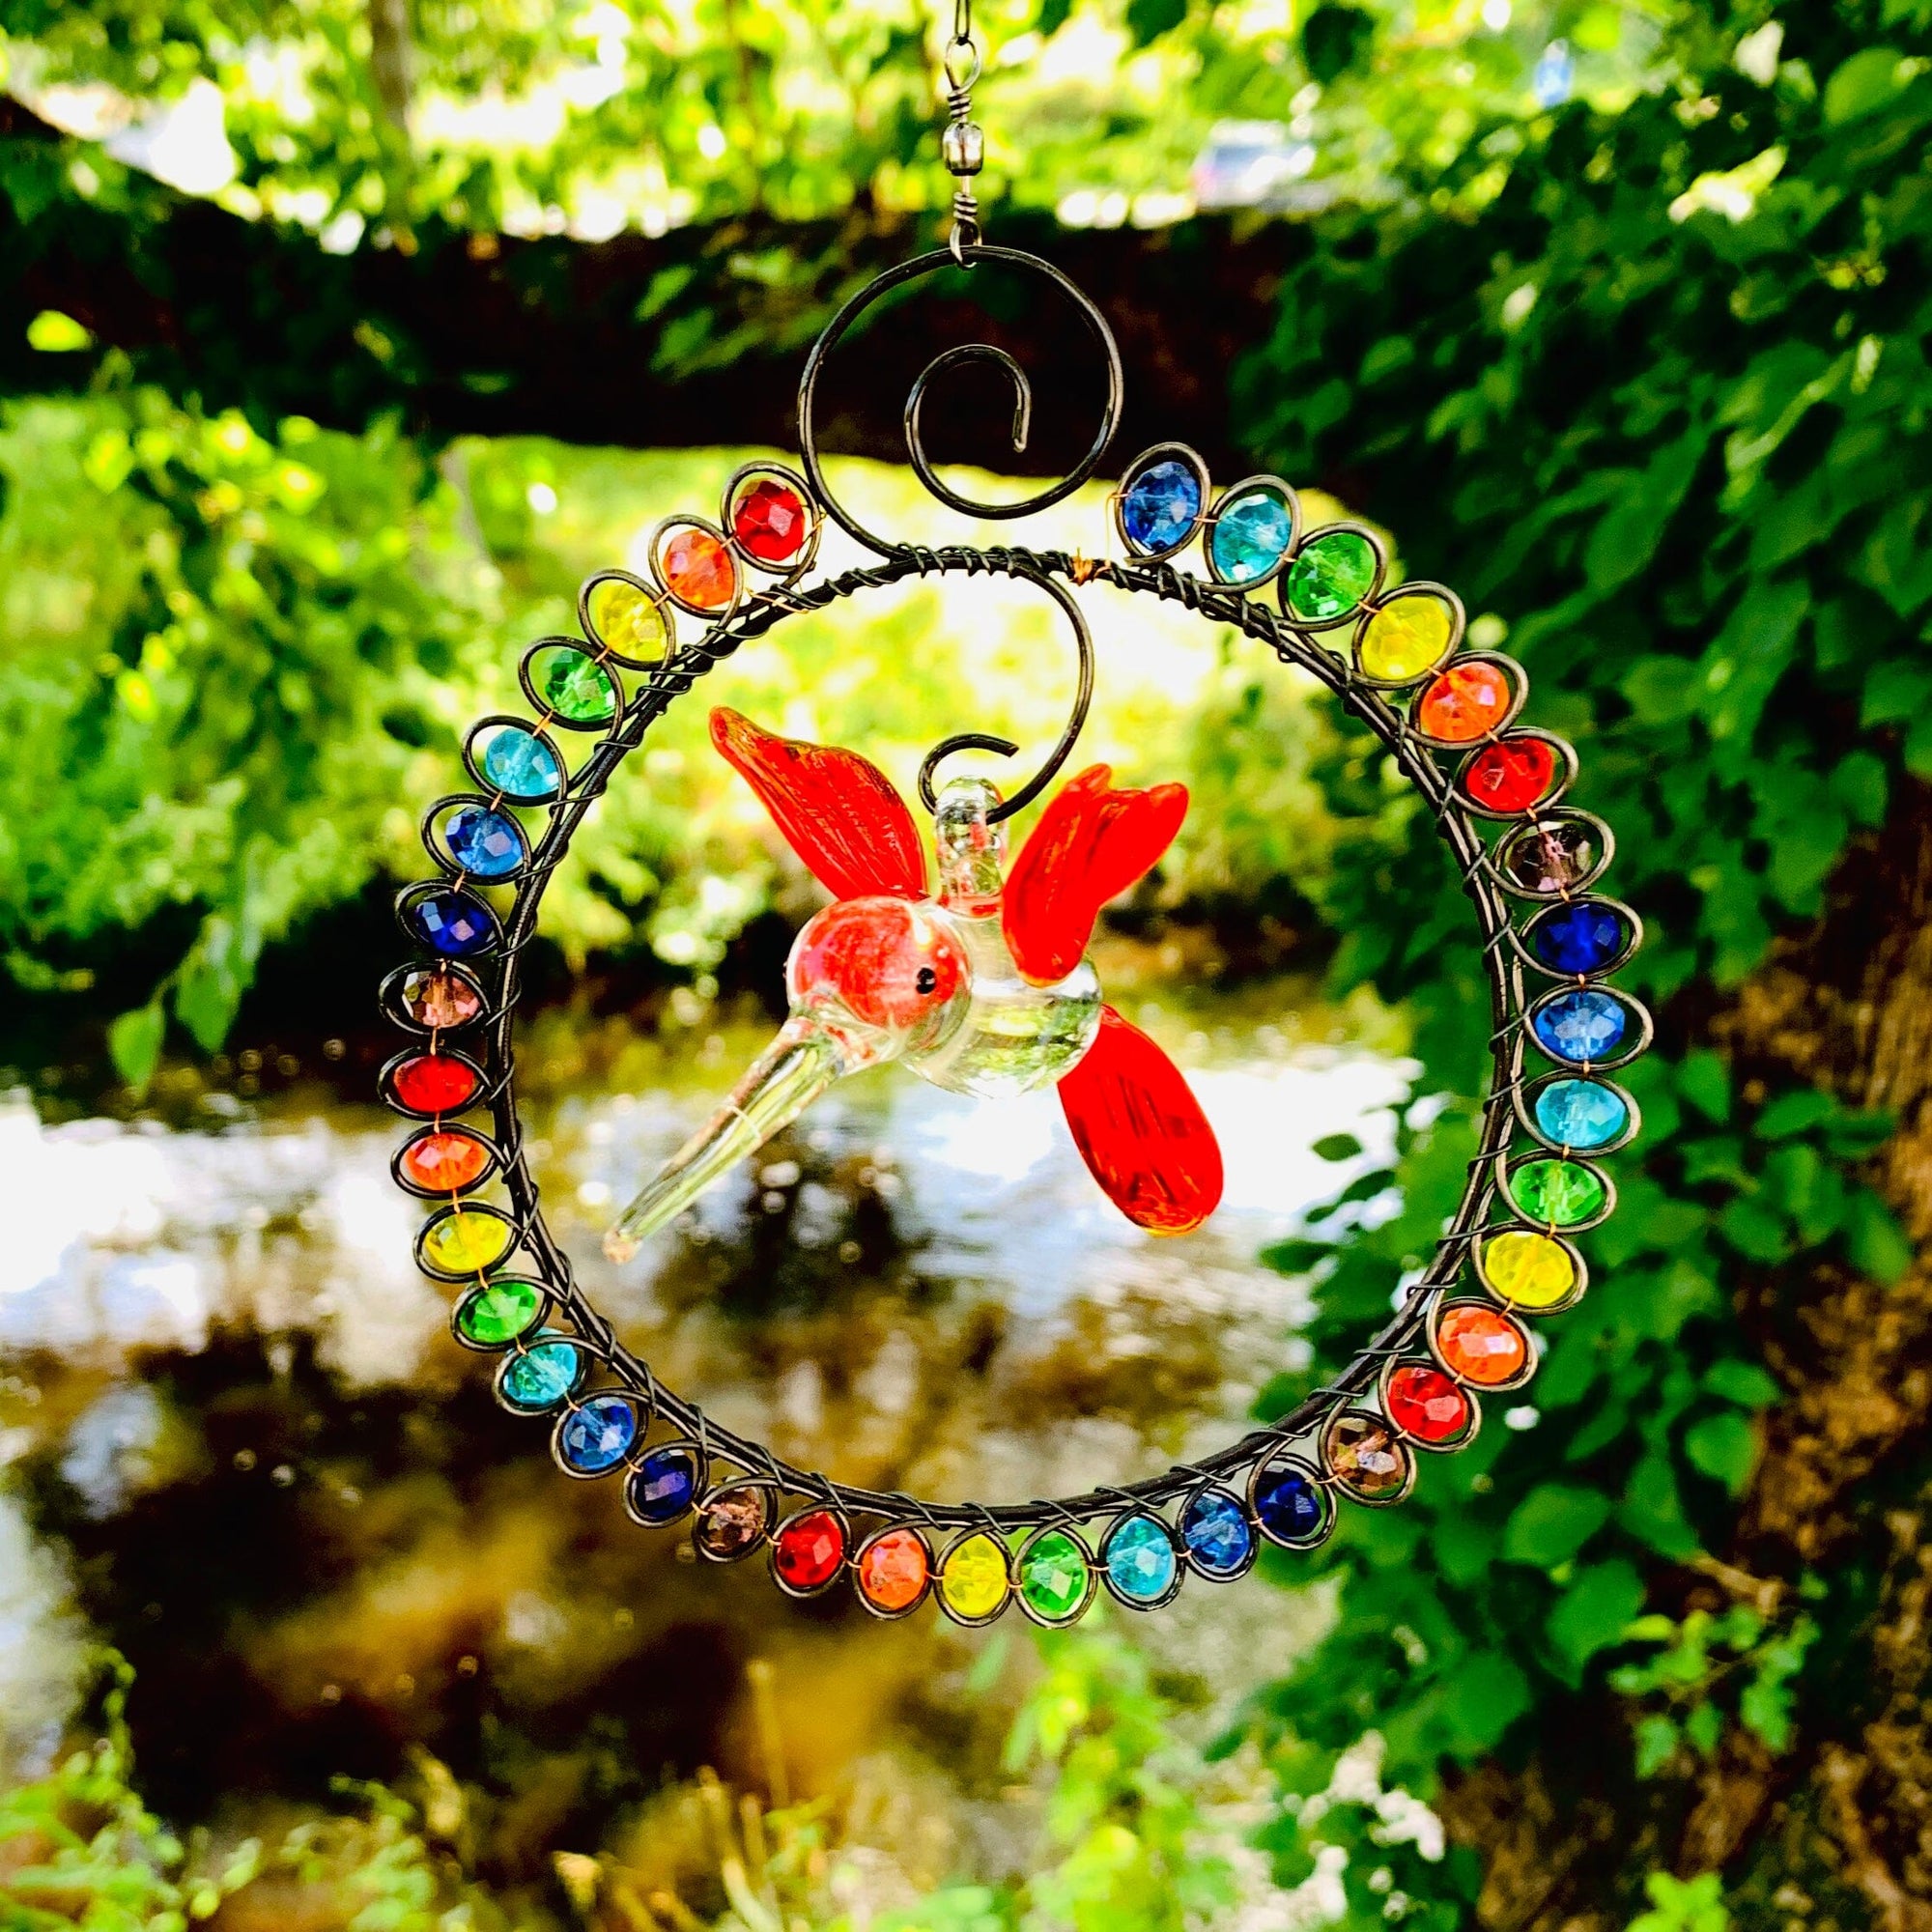 Glass Beaded Suncatcher with Hummingbird 7, Red Decor Whimsical Wire and Glass 